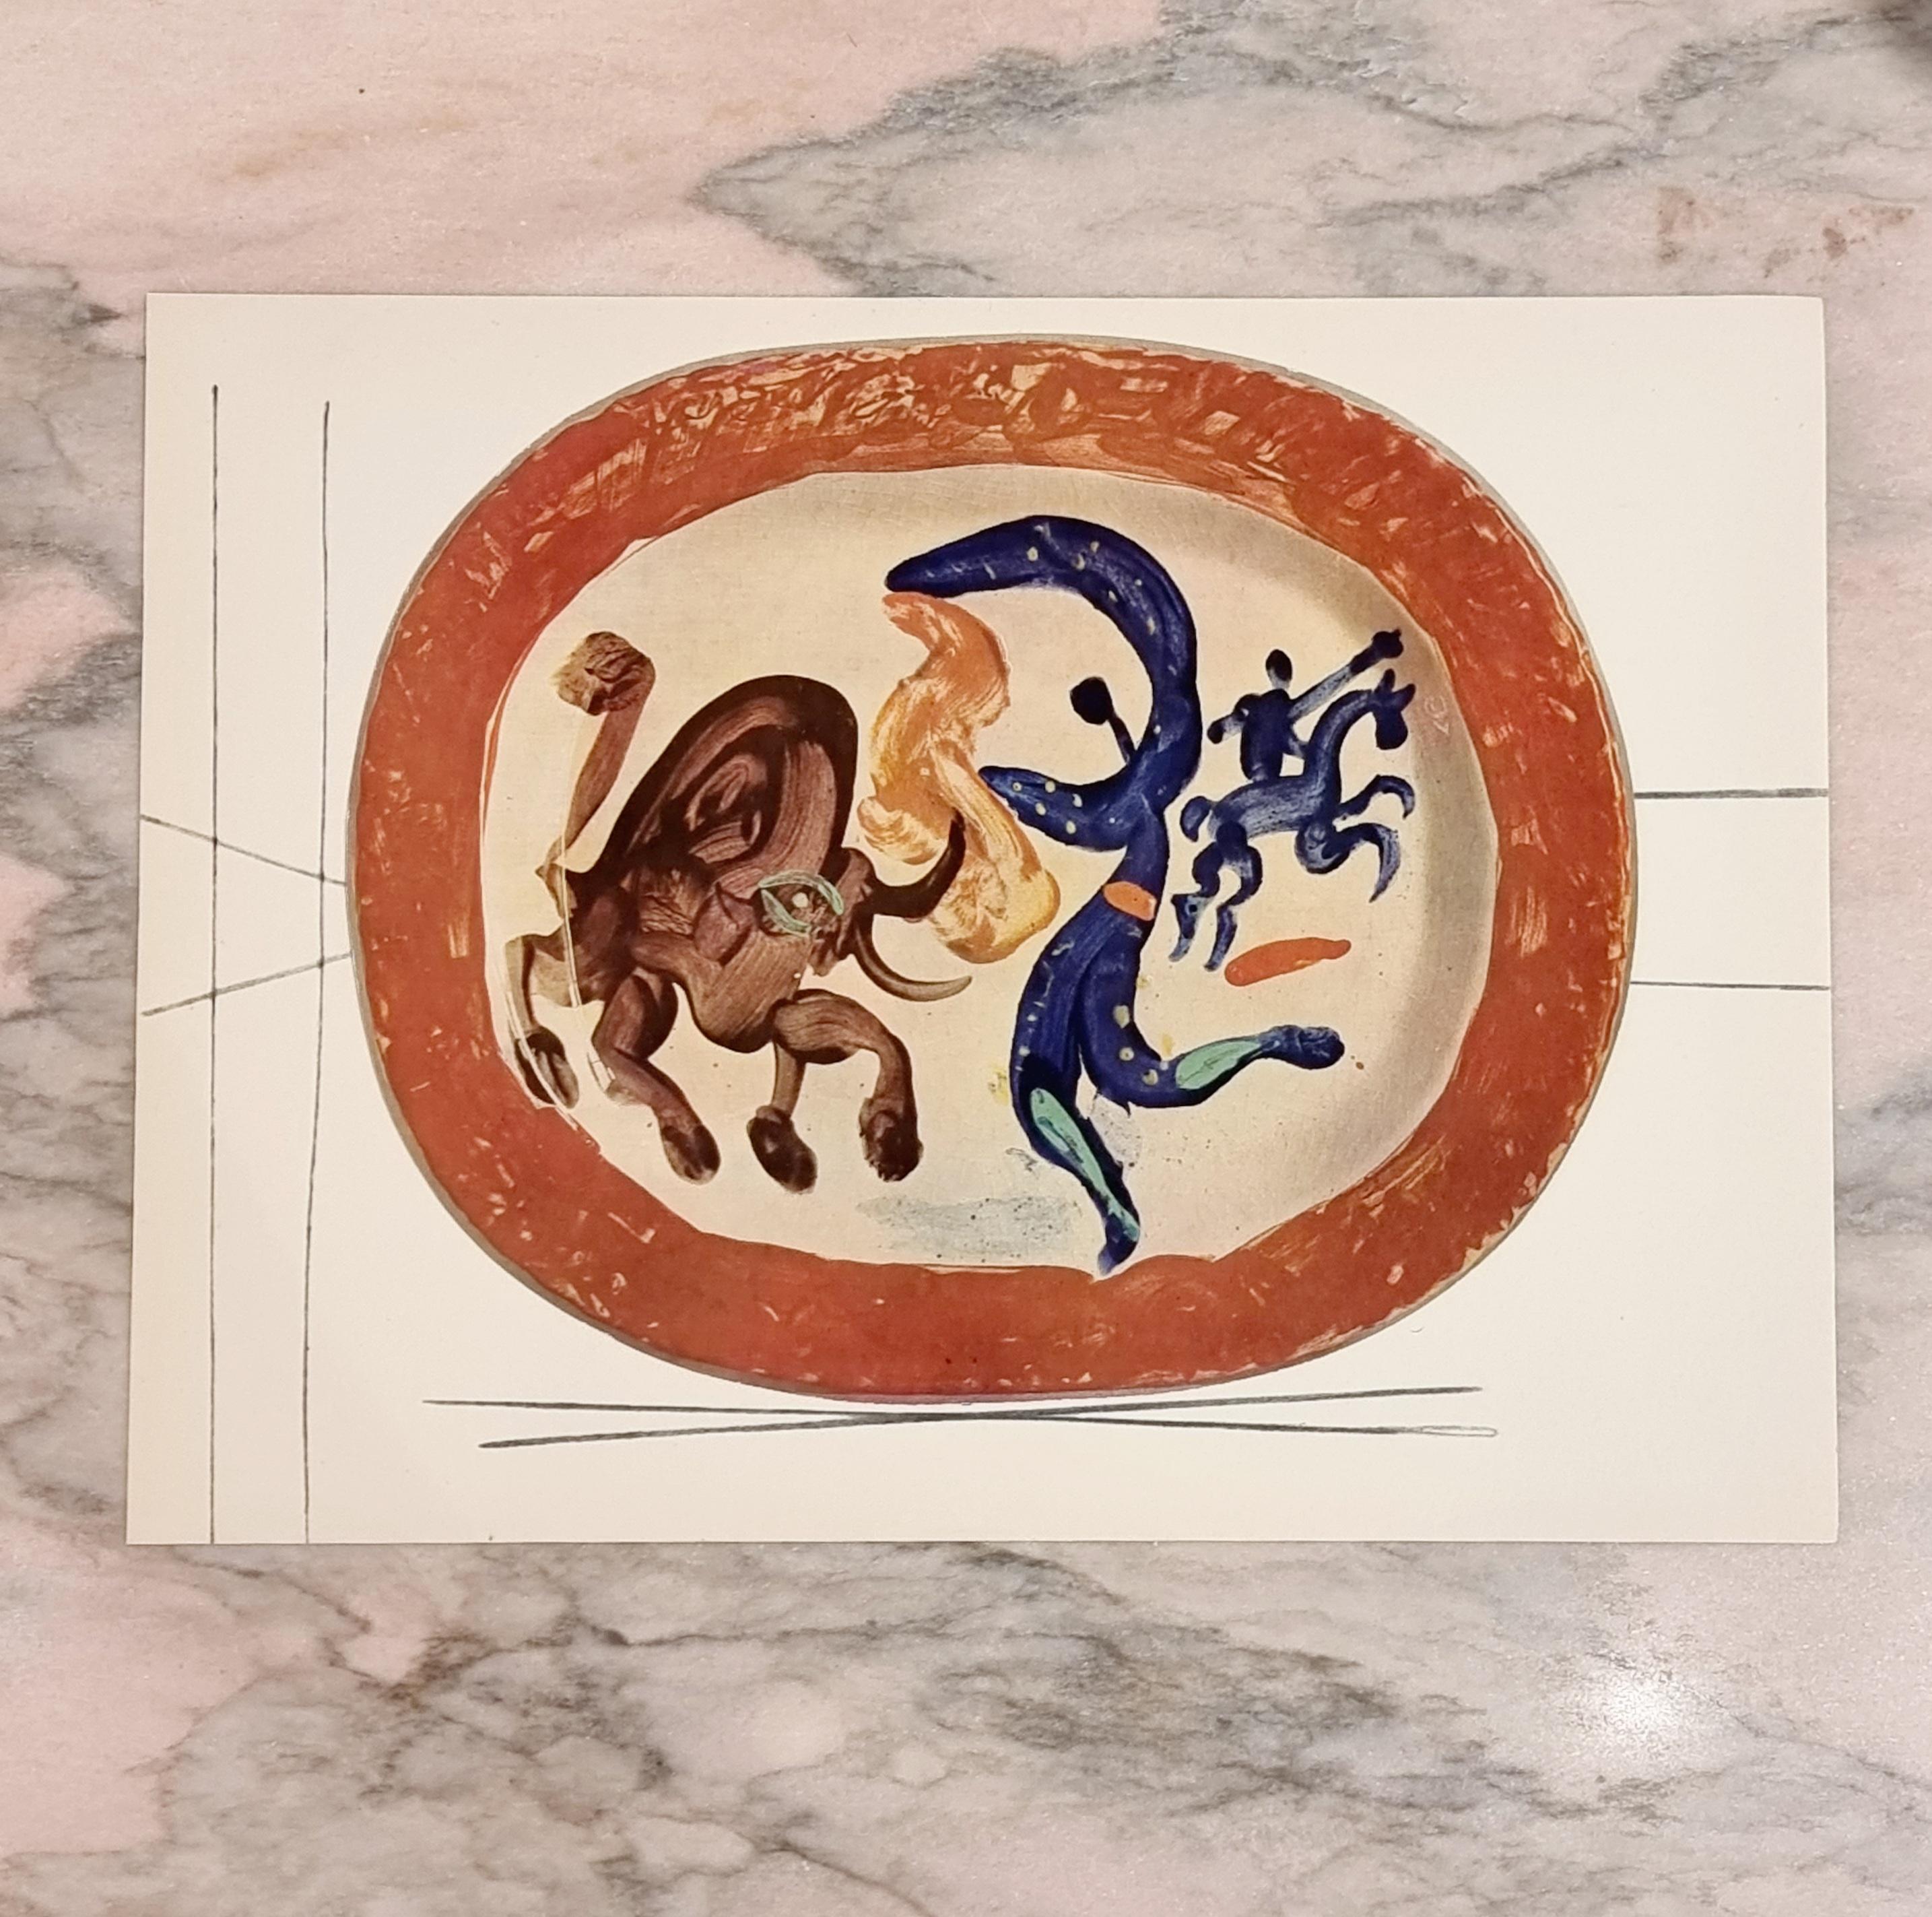 An exquisite shiny polychrome print of Picasso Vallauris ceramic plate depicting corrida de toros / bullfighting. The color print is attached to a thick, high quality paper with decorative lines. 

The print is originally from a Limited Edition Art